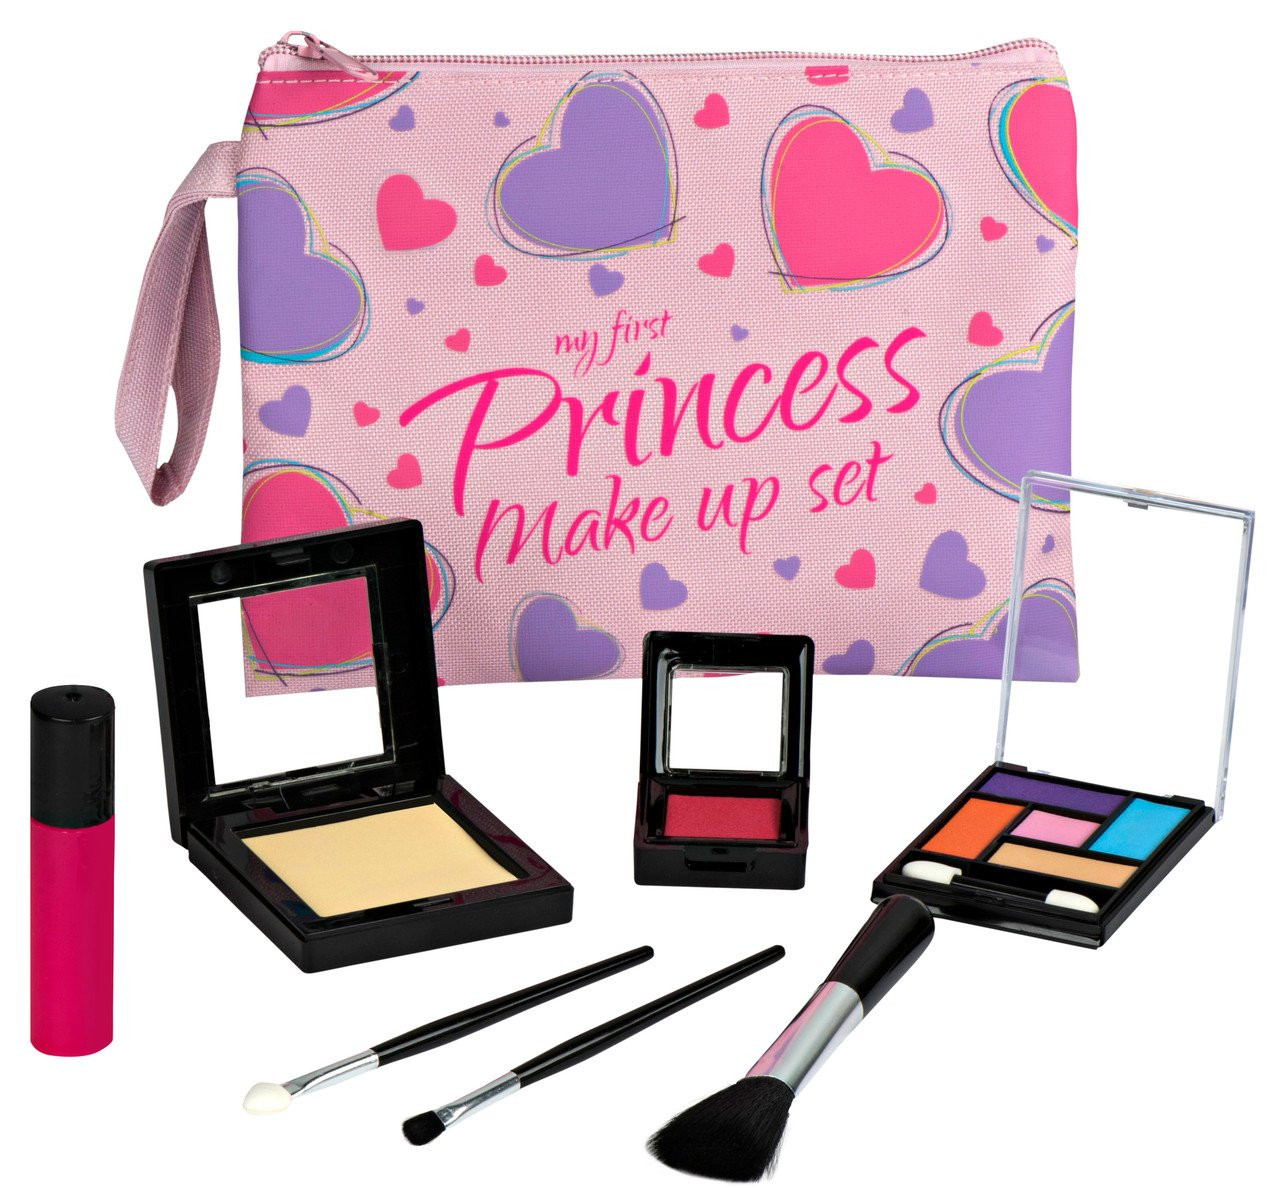 Playkidz Princess My First Purse Set - 8 Pieces Kids Play Purse and Accessories, Pretend Play Toy Set with Cool Girl Accessories